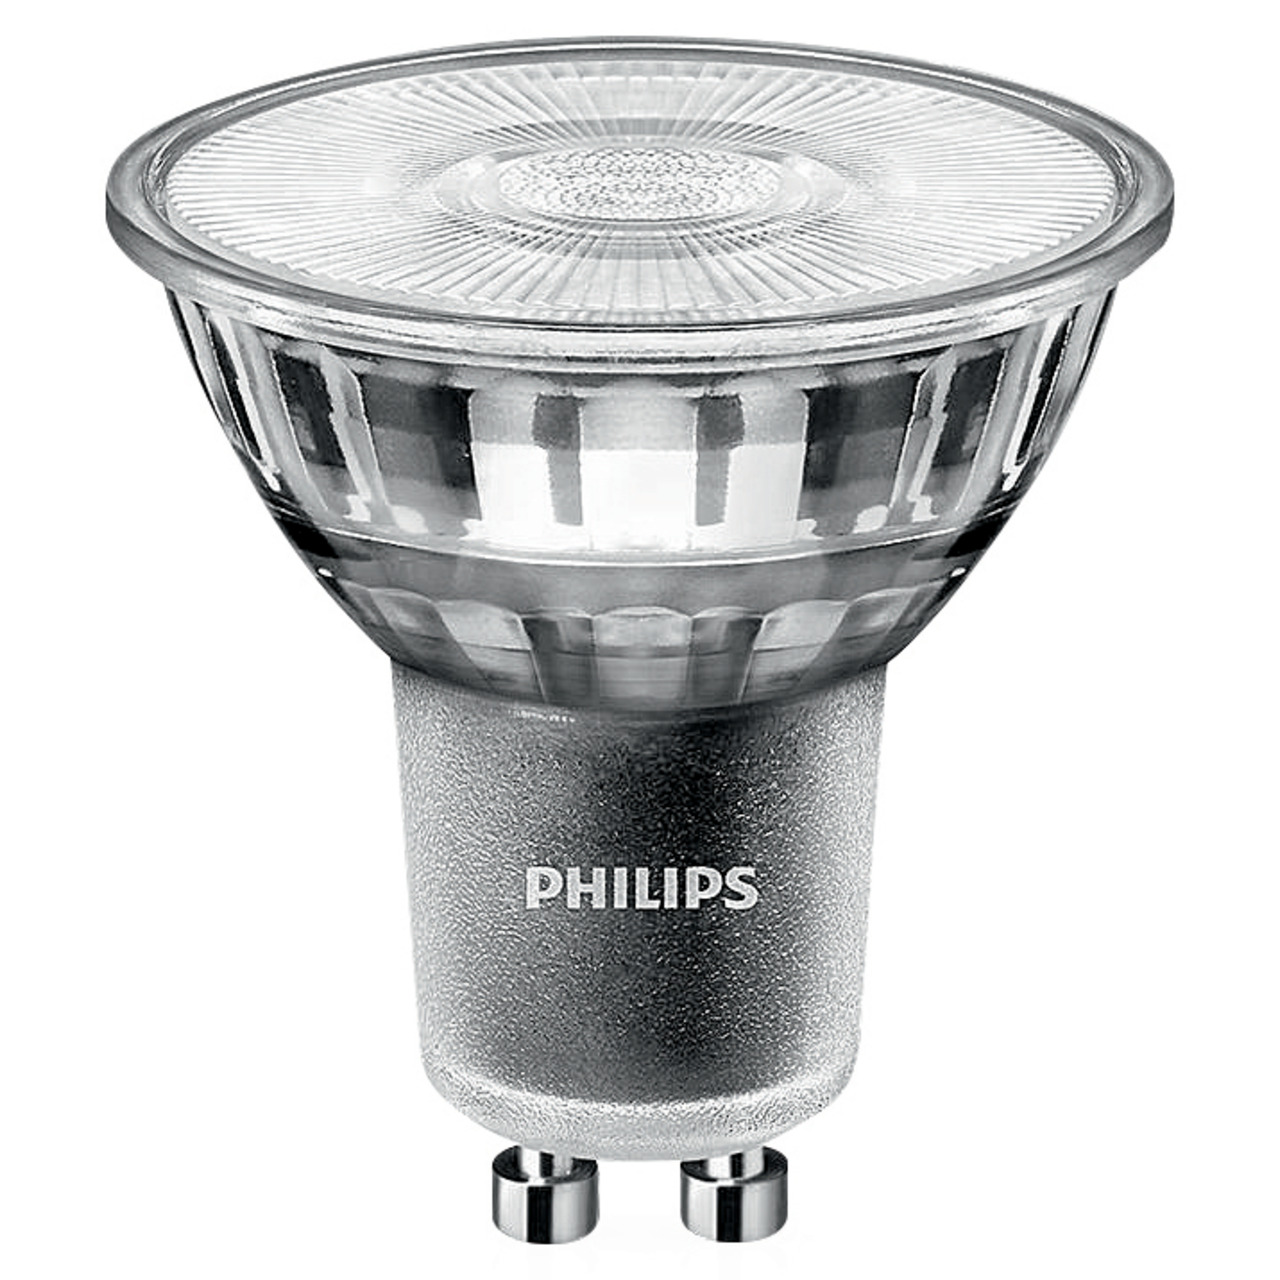 Philips MASTER ExpertColor 5-5-W-GU10-LED-Lampe- 355 lm- 97 Ra- 36 - 2700K- warmweiss- dimmbar unter Beleuchtung